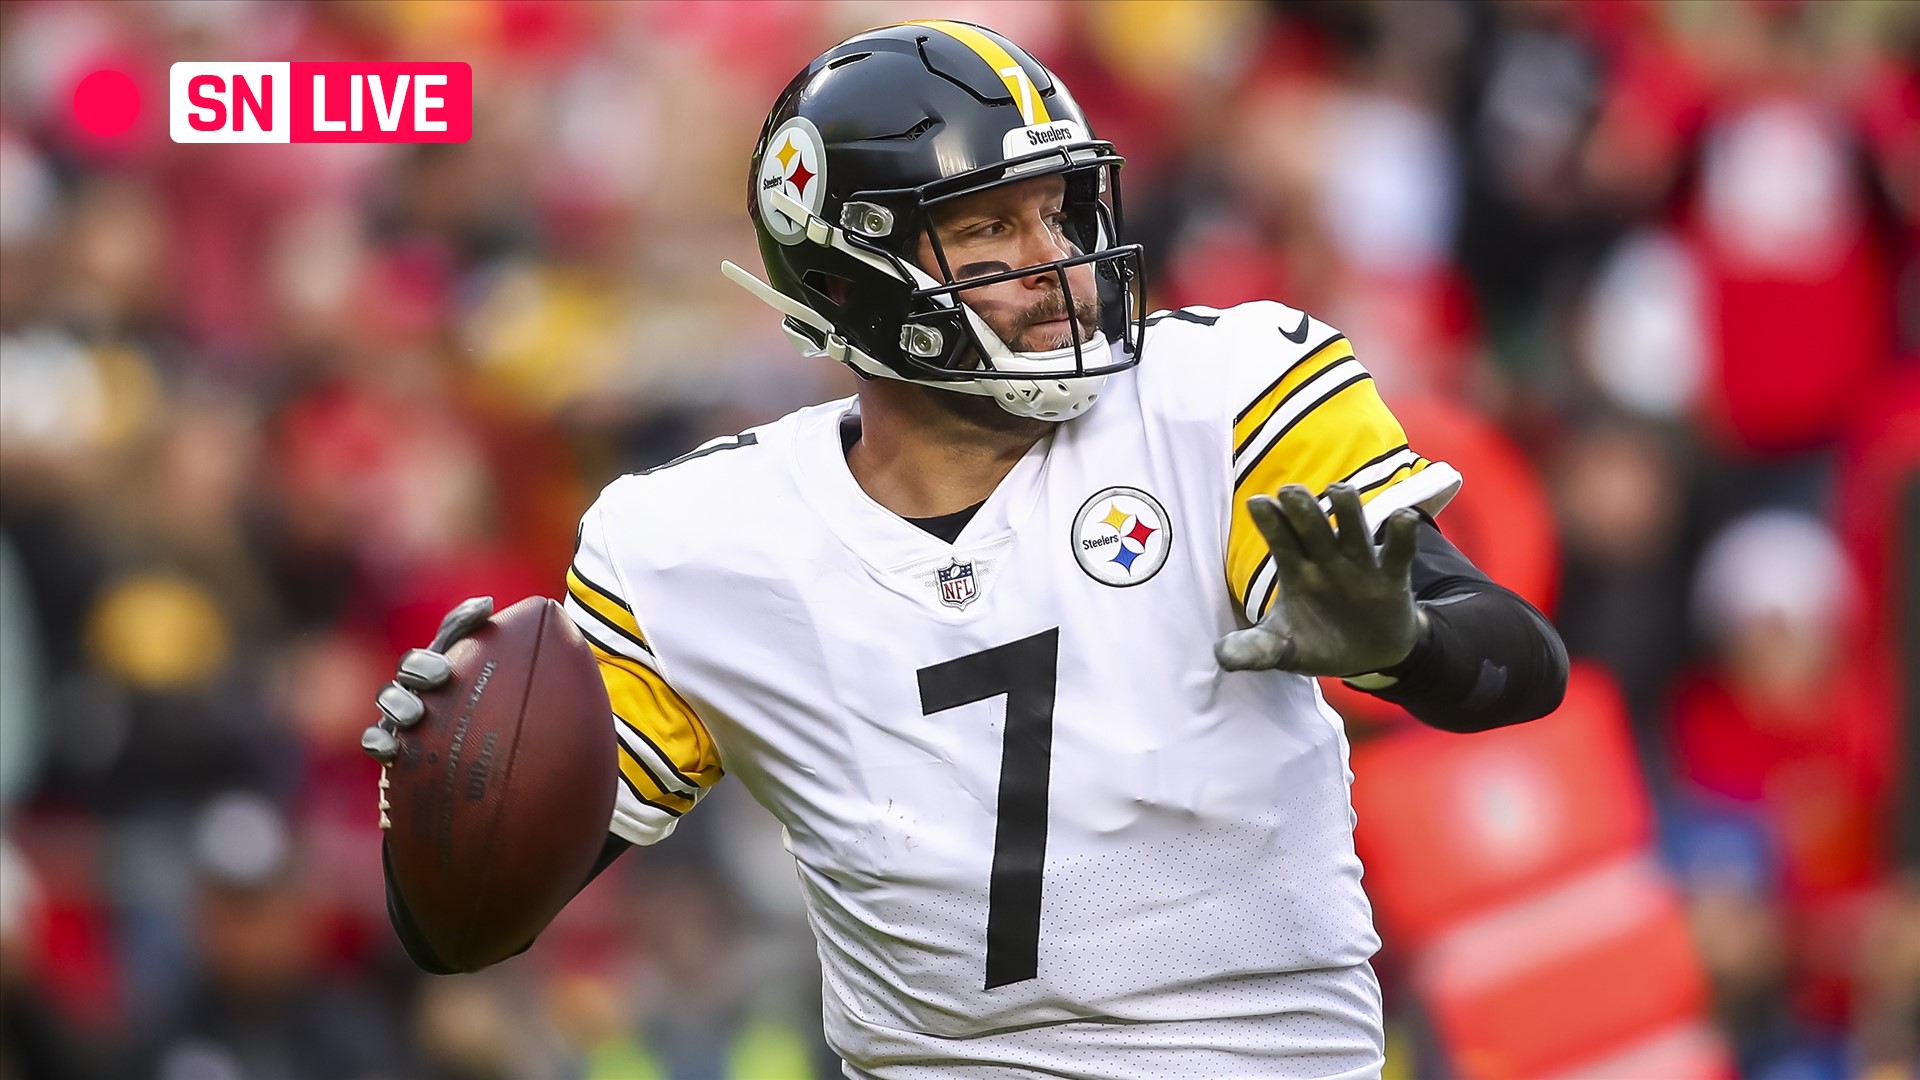 Browns vs Steelers results updates and highlights of Monday Night